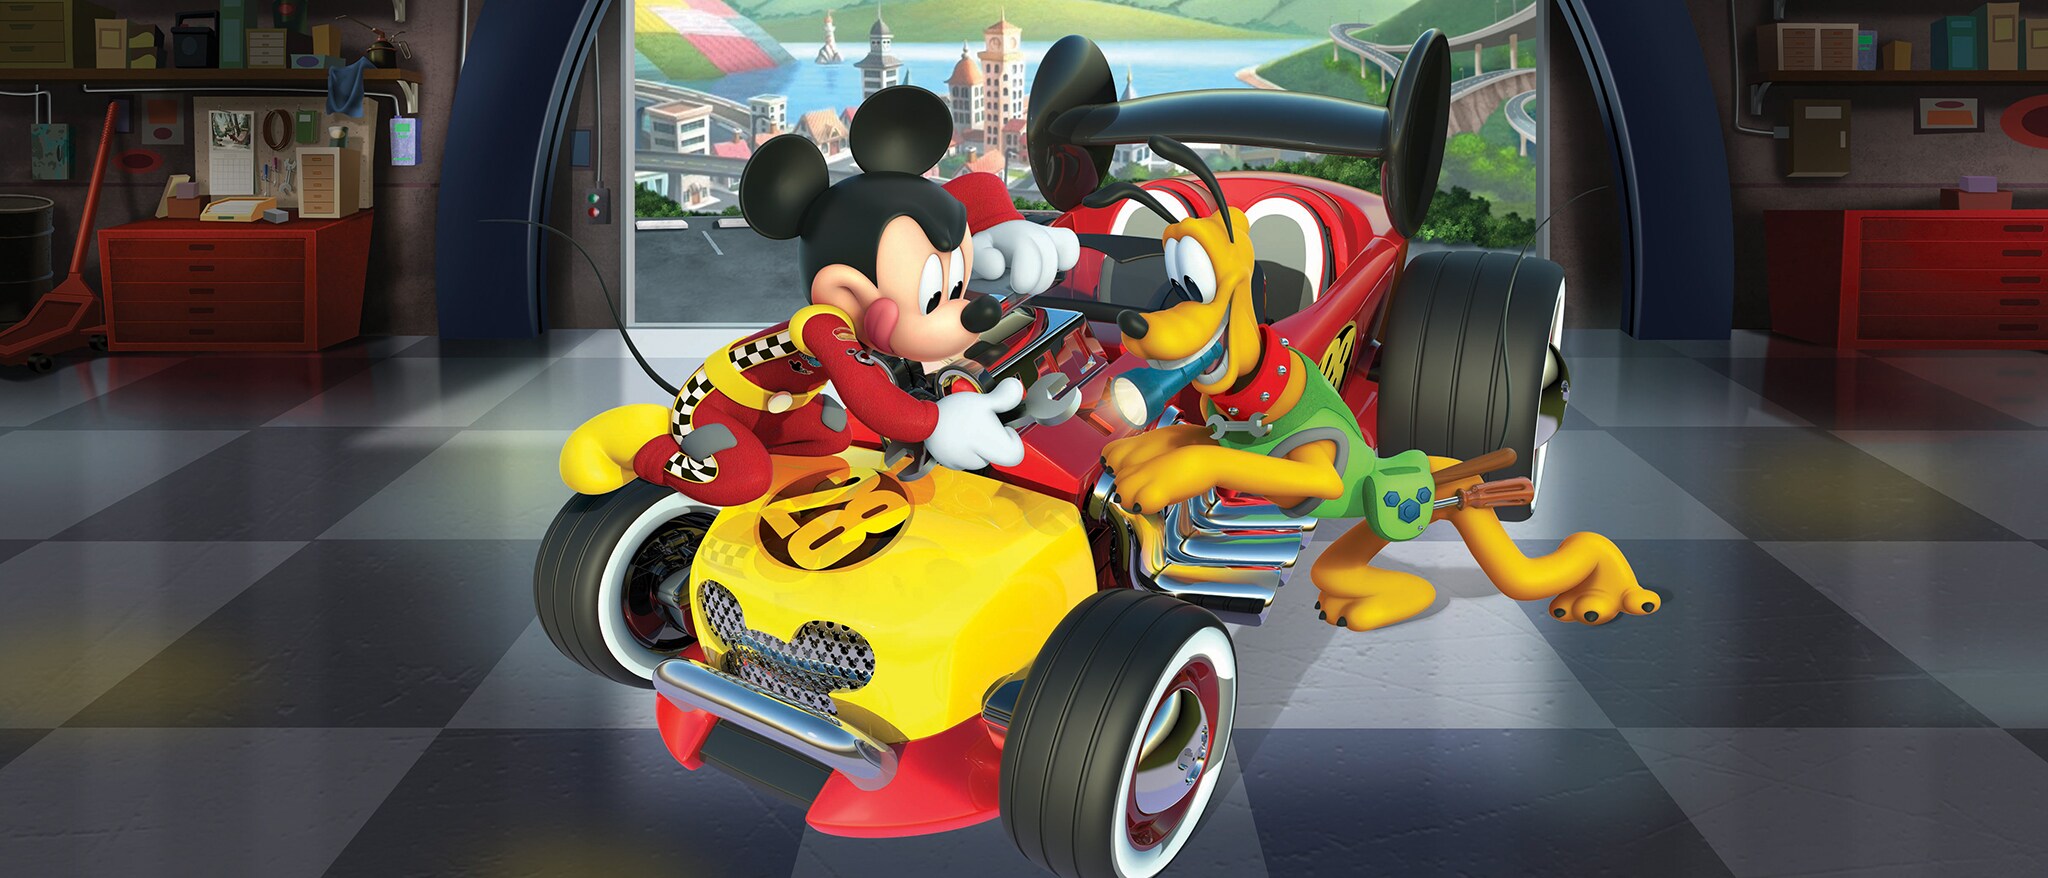 Mickey and the Roadster Racers | Disney Shows